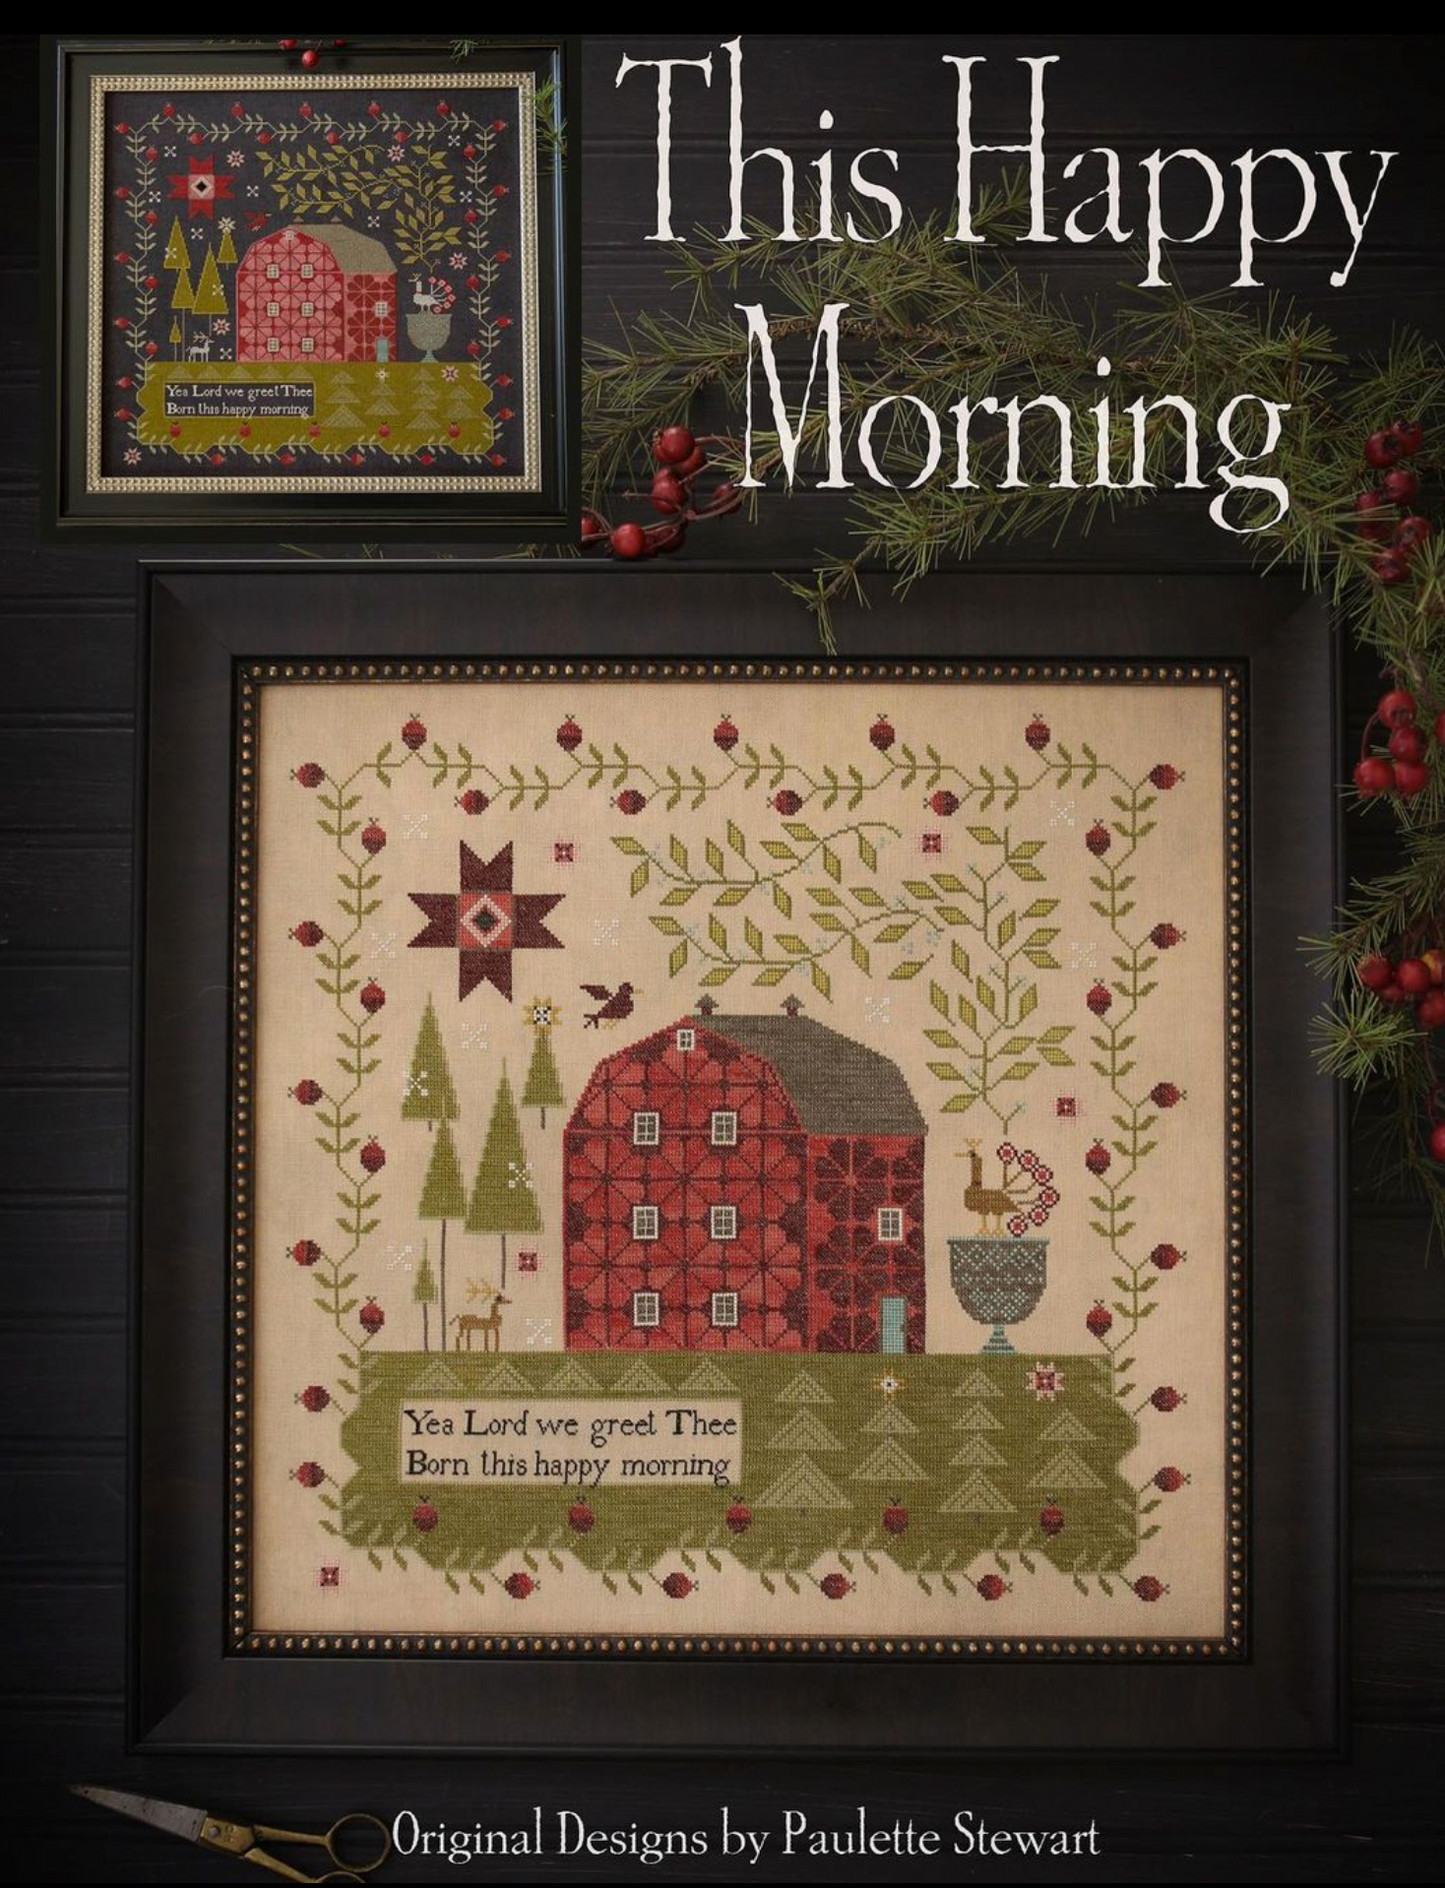 This Happy Morning by Plum Street Samplers